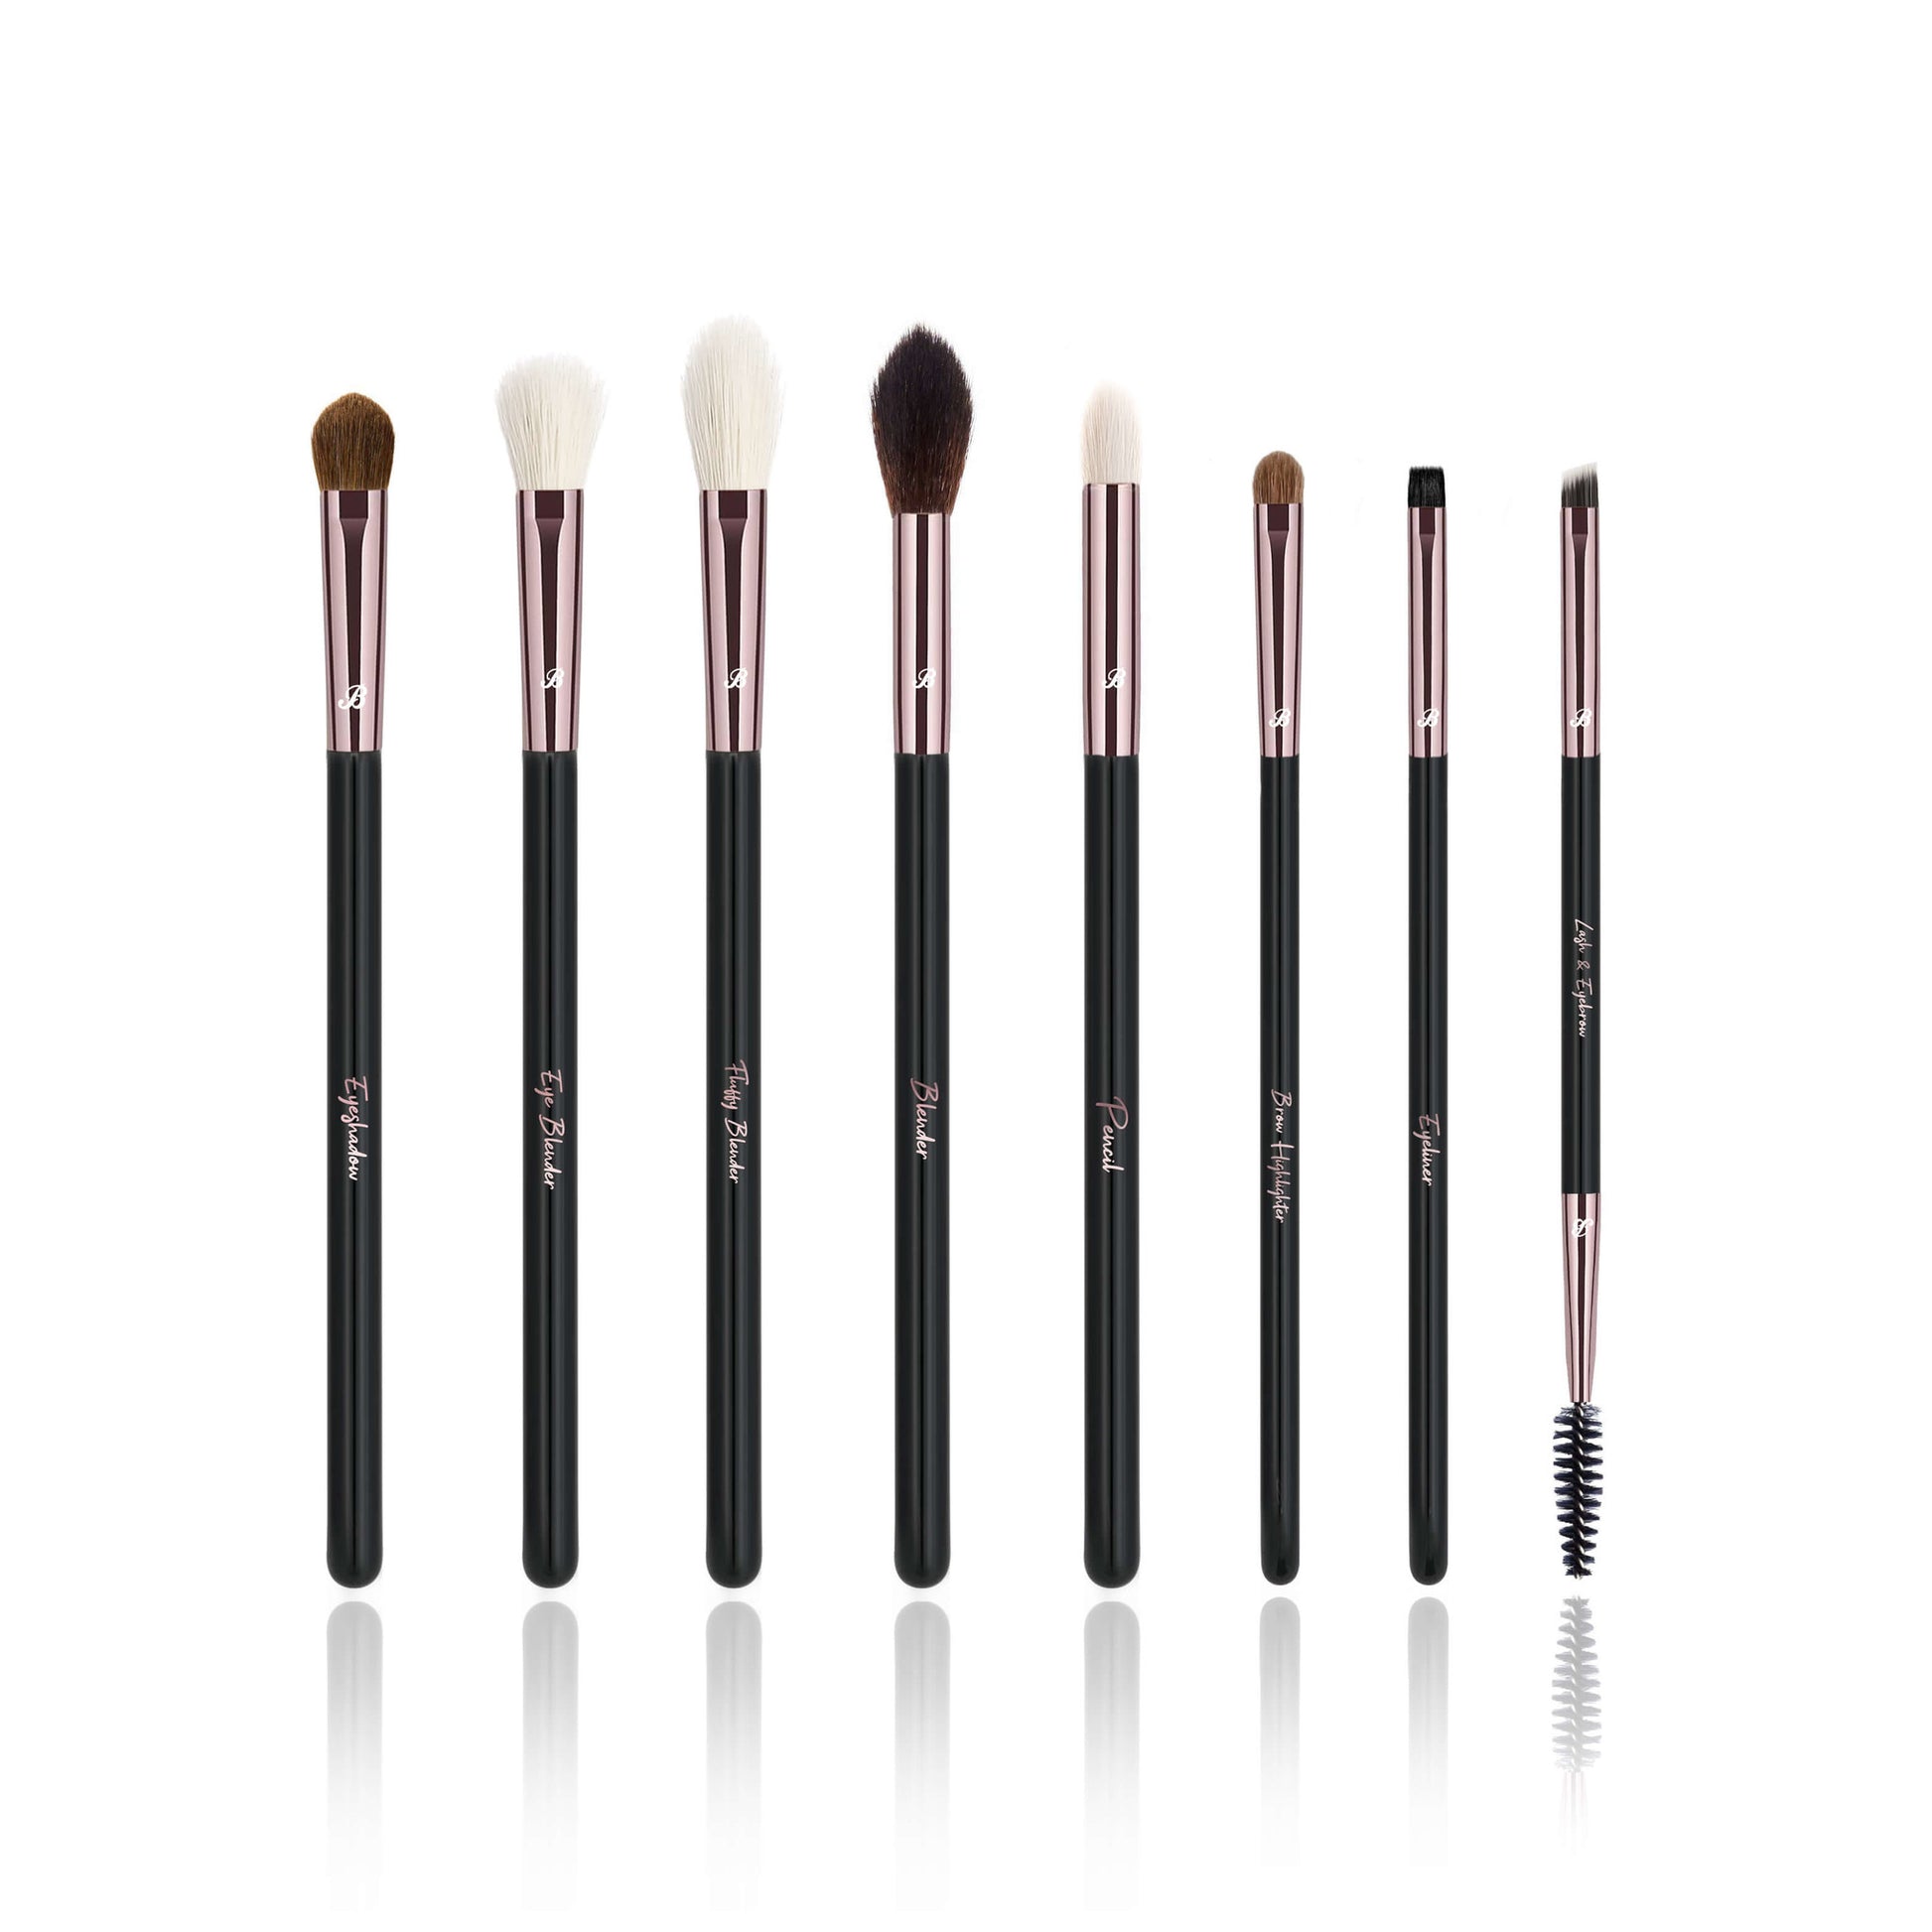 Set of 8 Makeup Brushes for eyes. 